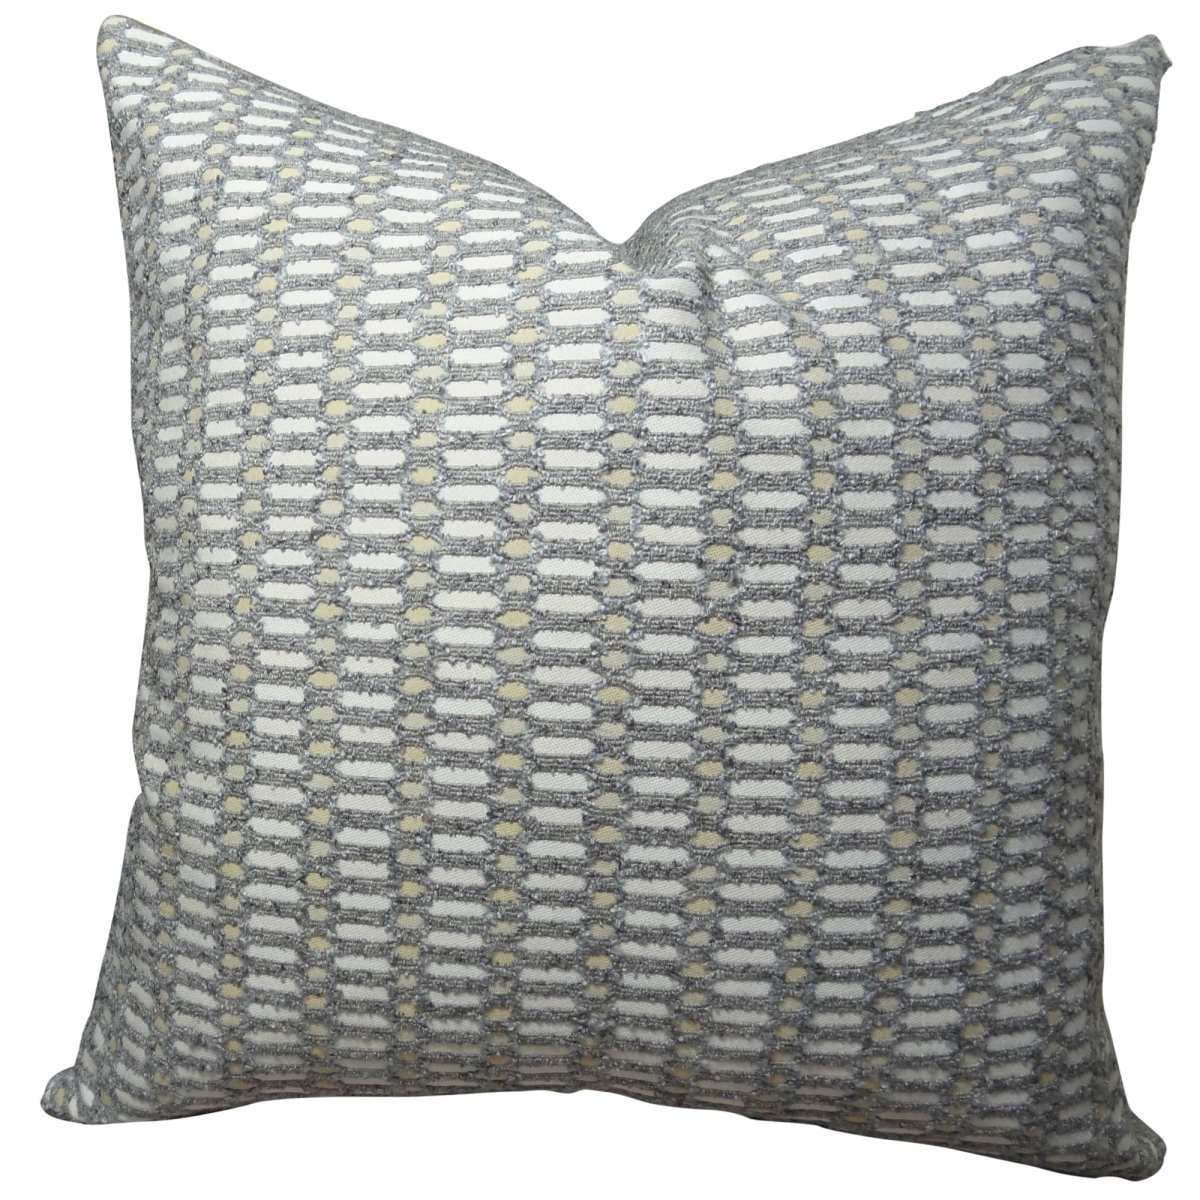 DwellingDesigns Circle Joiners Handmade Throw Pillow - Gray & Cream - 20 x 30 in. Double Sided Queen Size